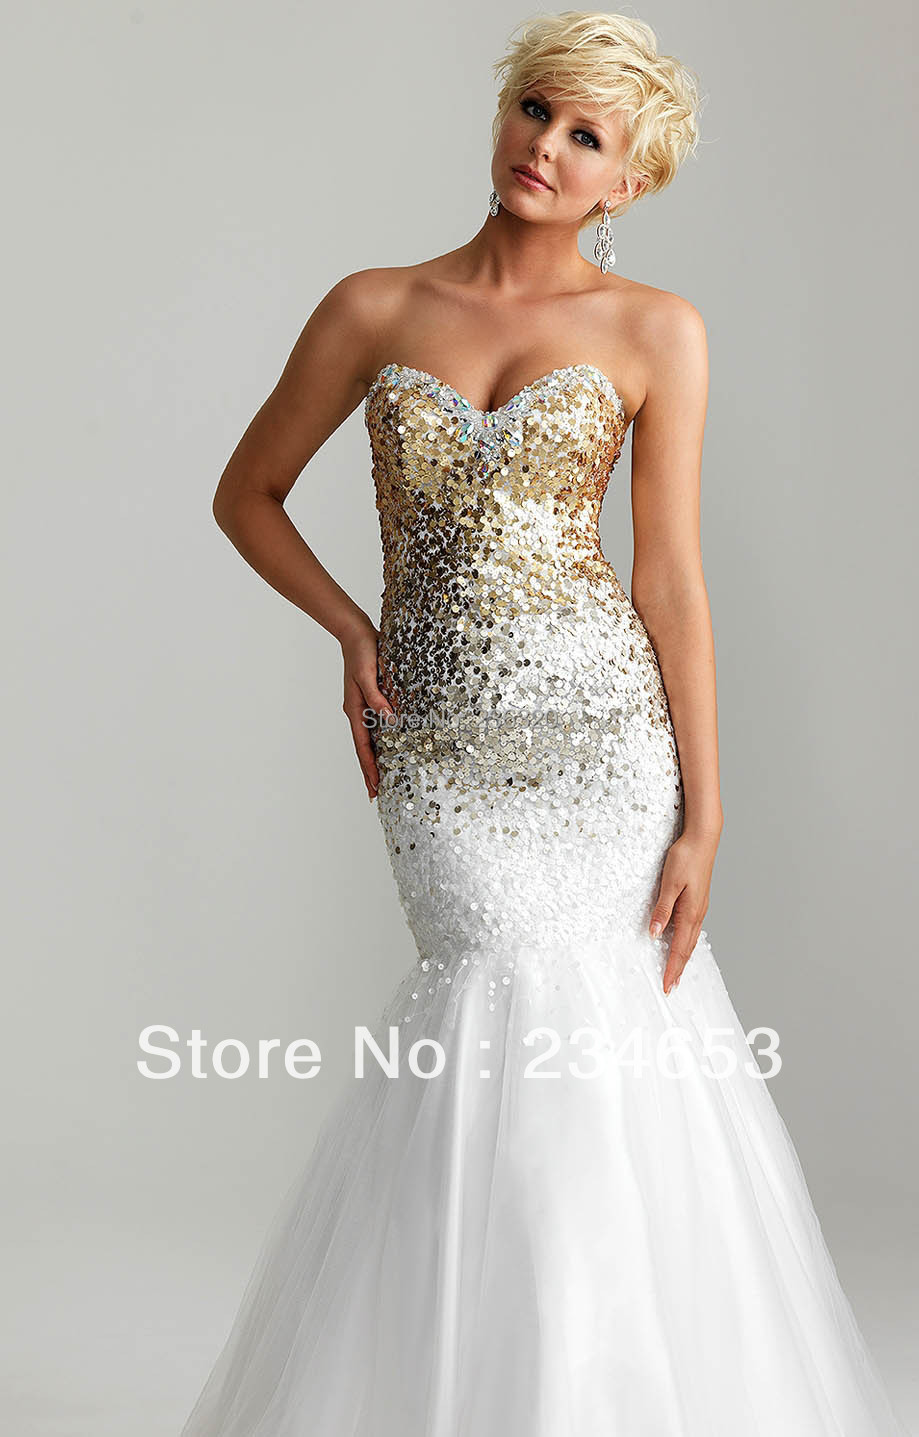 White-Gold-Sequins-Tulle-Mermaid-Prom-Dresses-Zipper-Back-Special ...